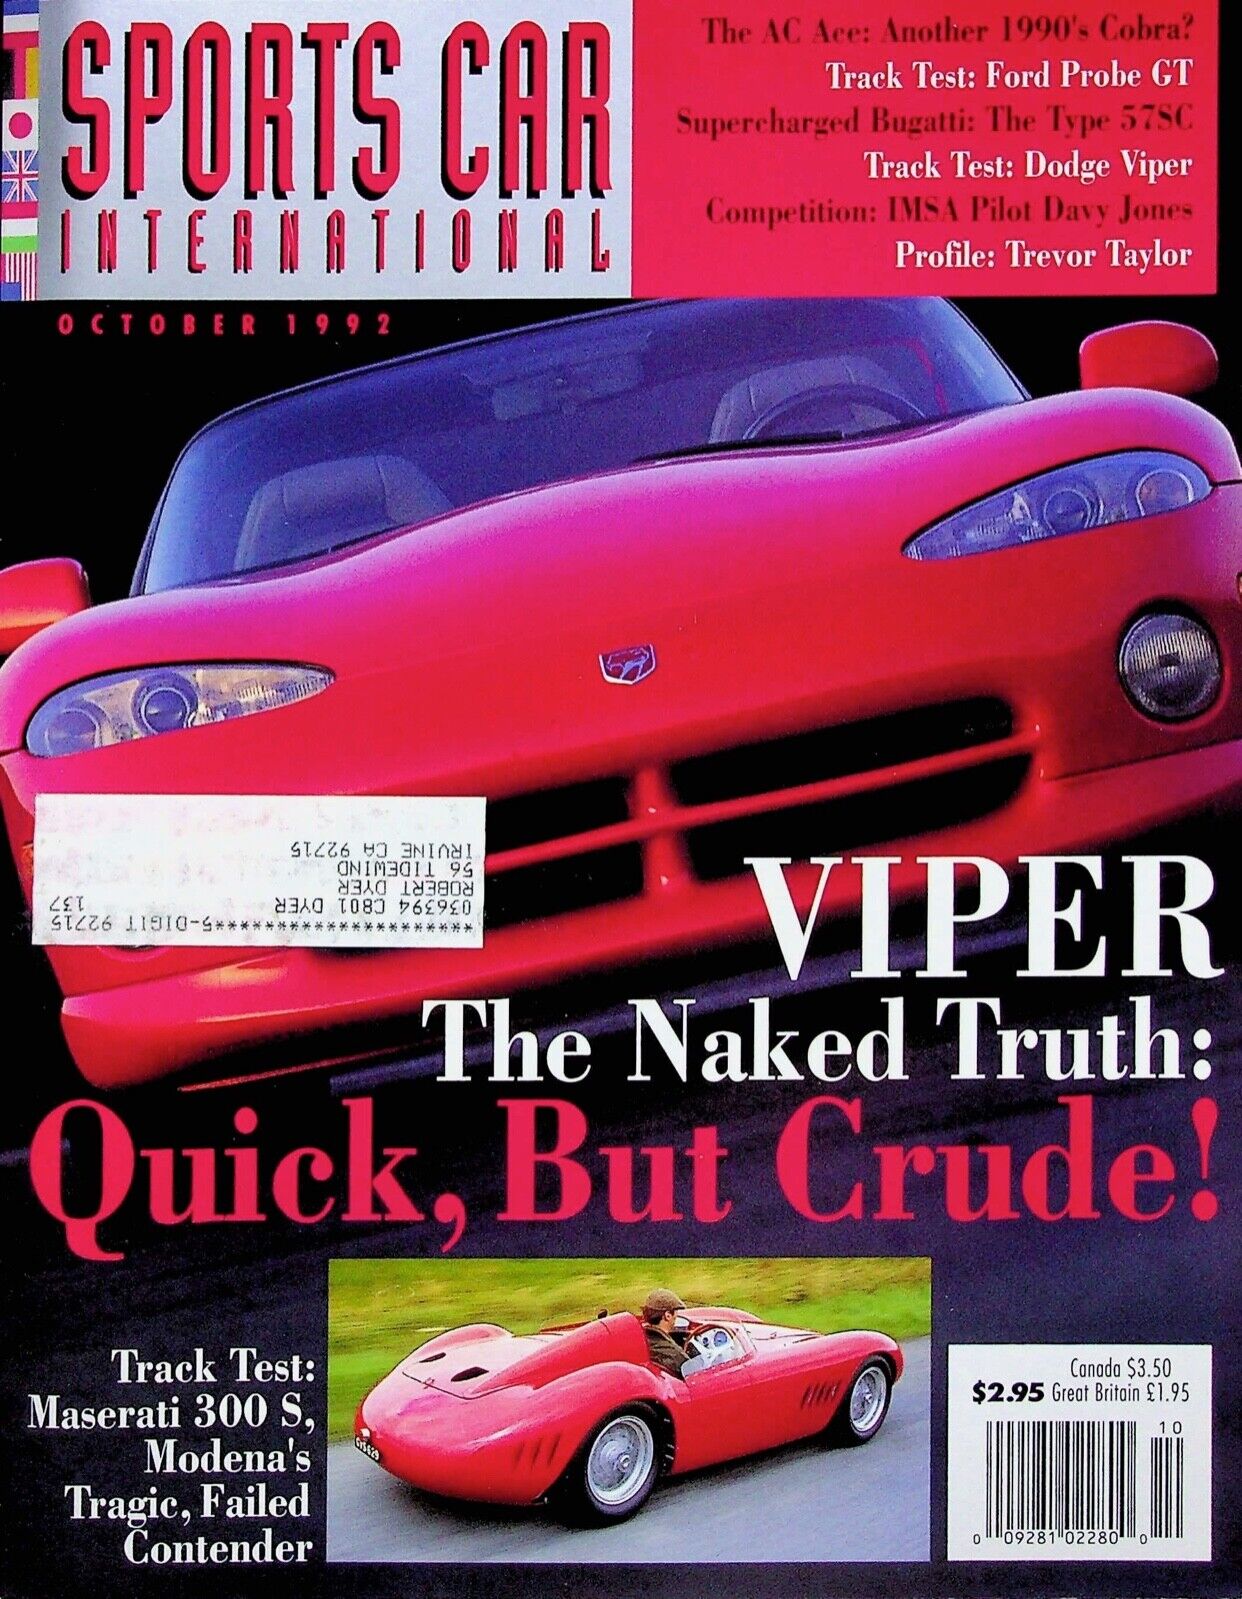 VIPER THE NAKED TRUTH: QUICK , But Crude- SPORTS CAR INTERNATIONAL OCTOBER 1992